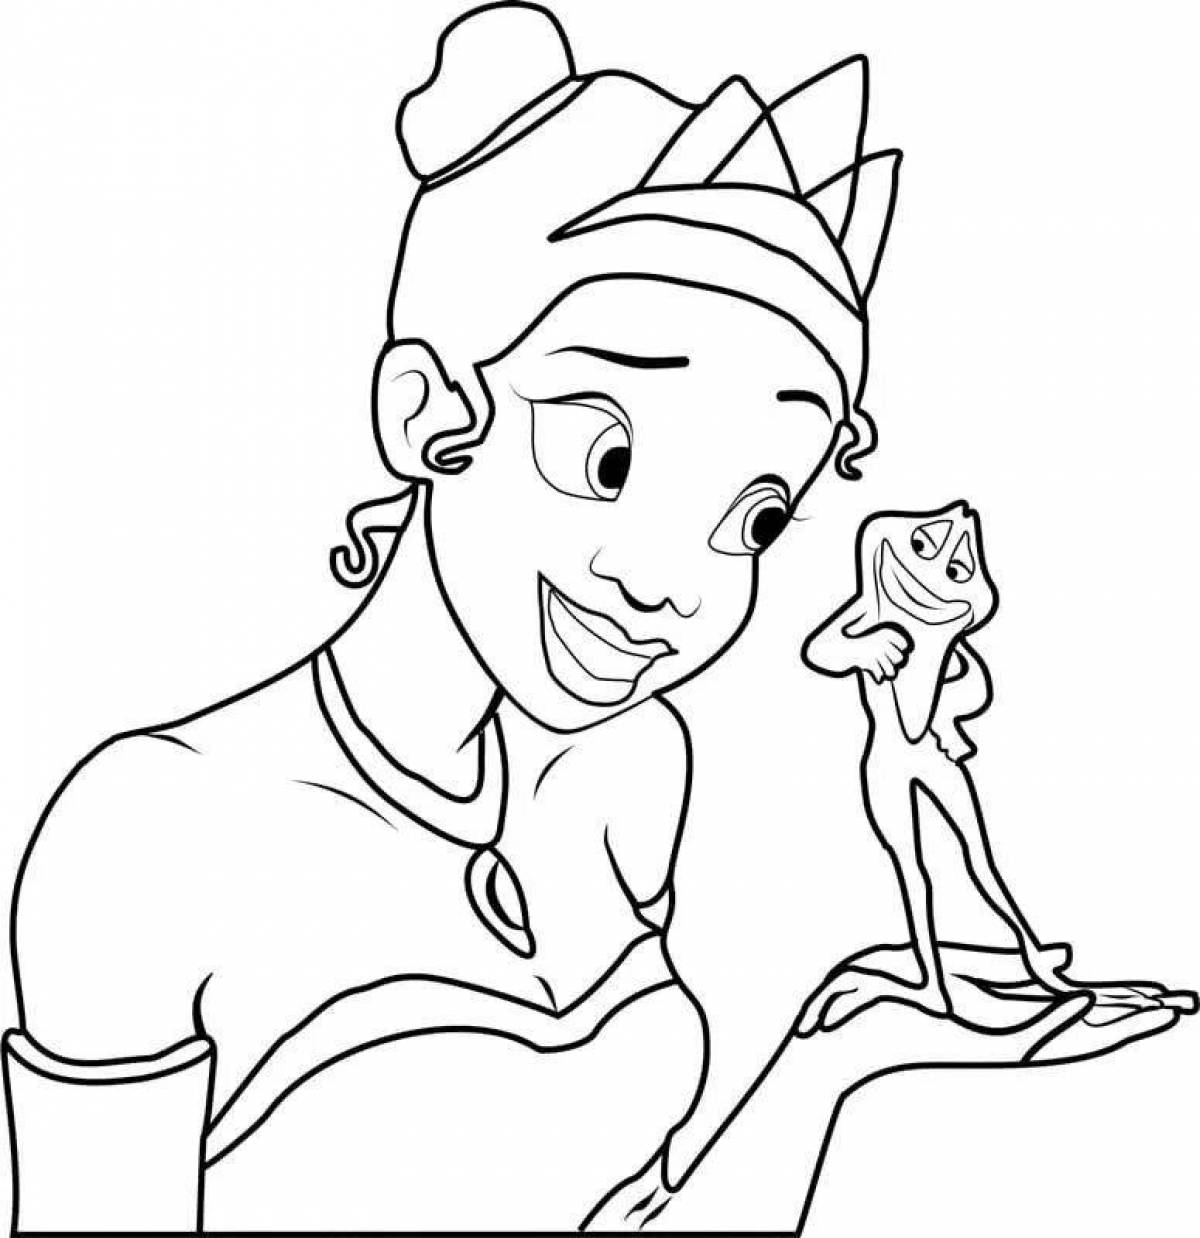 Animated tiana coloring page